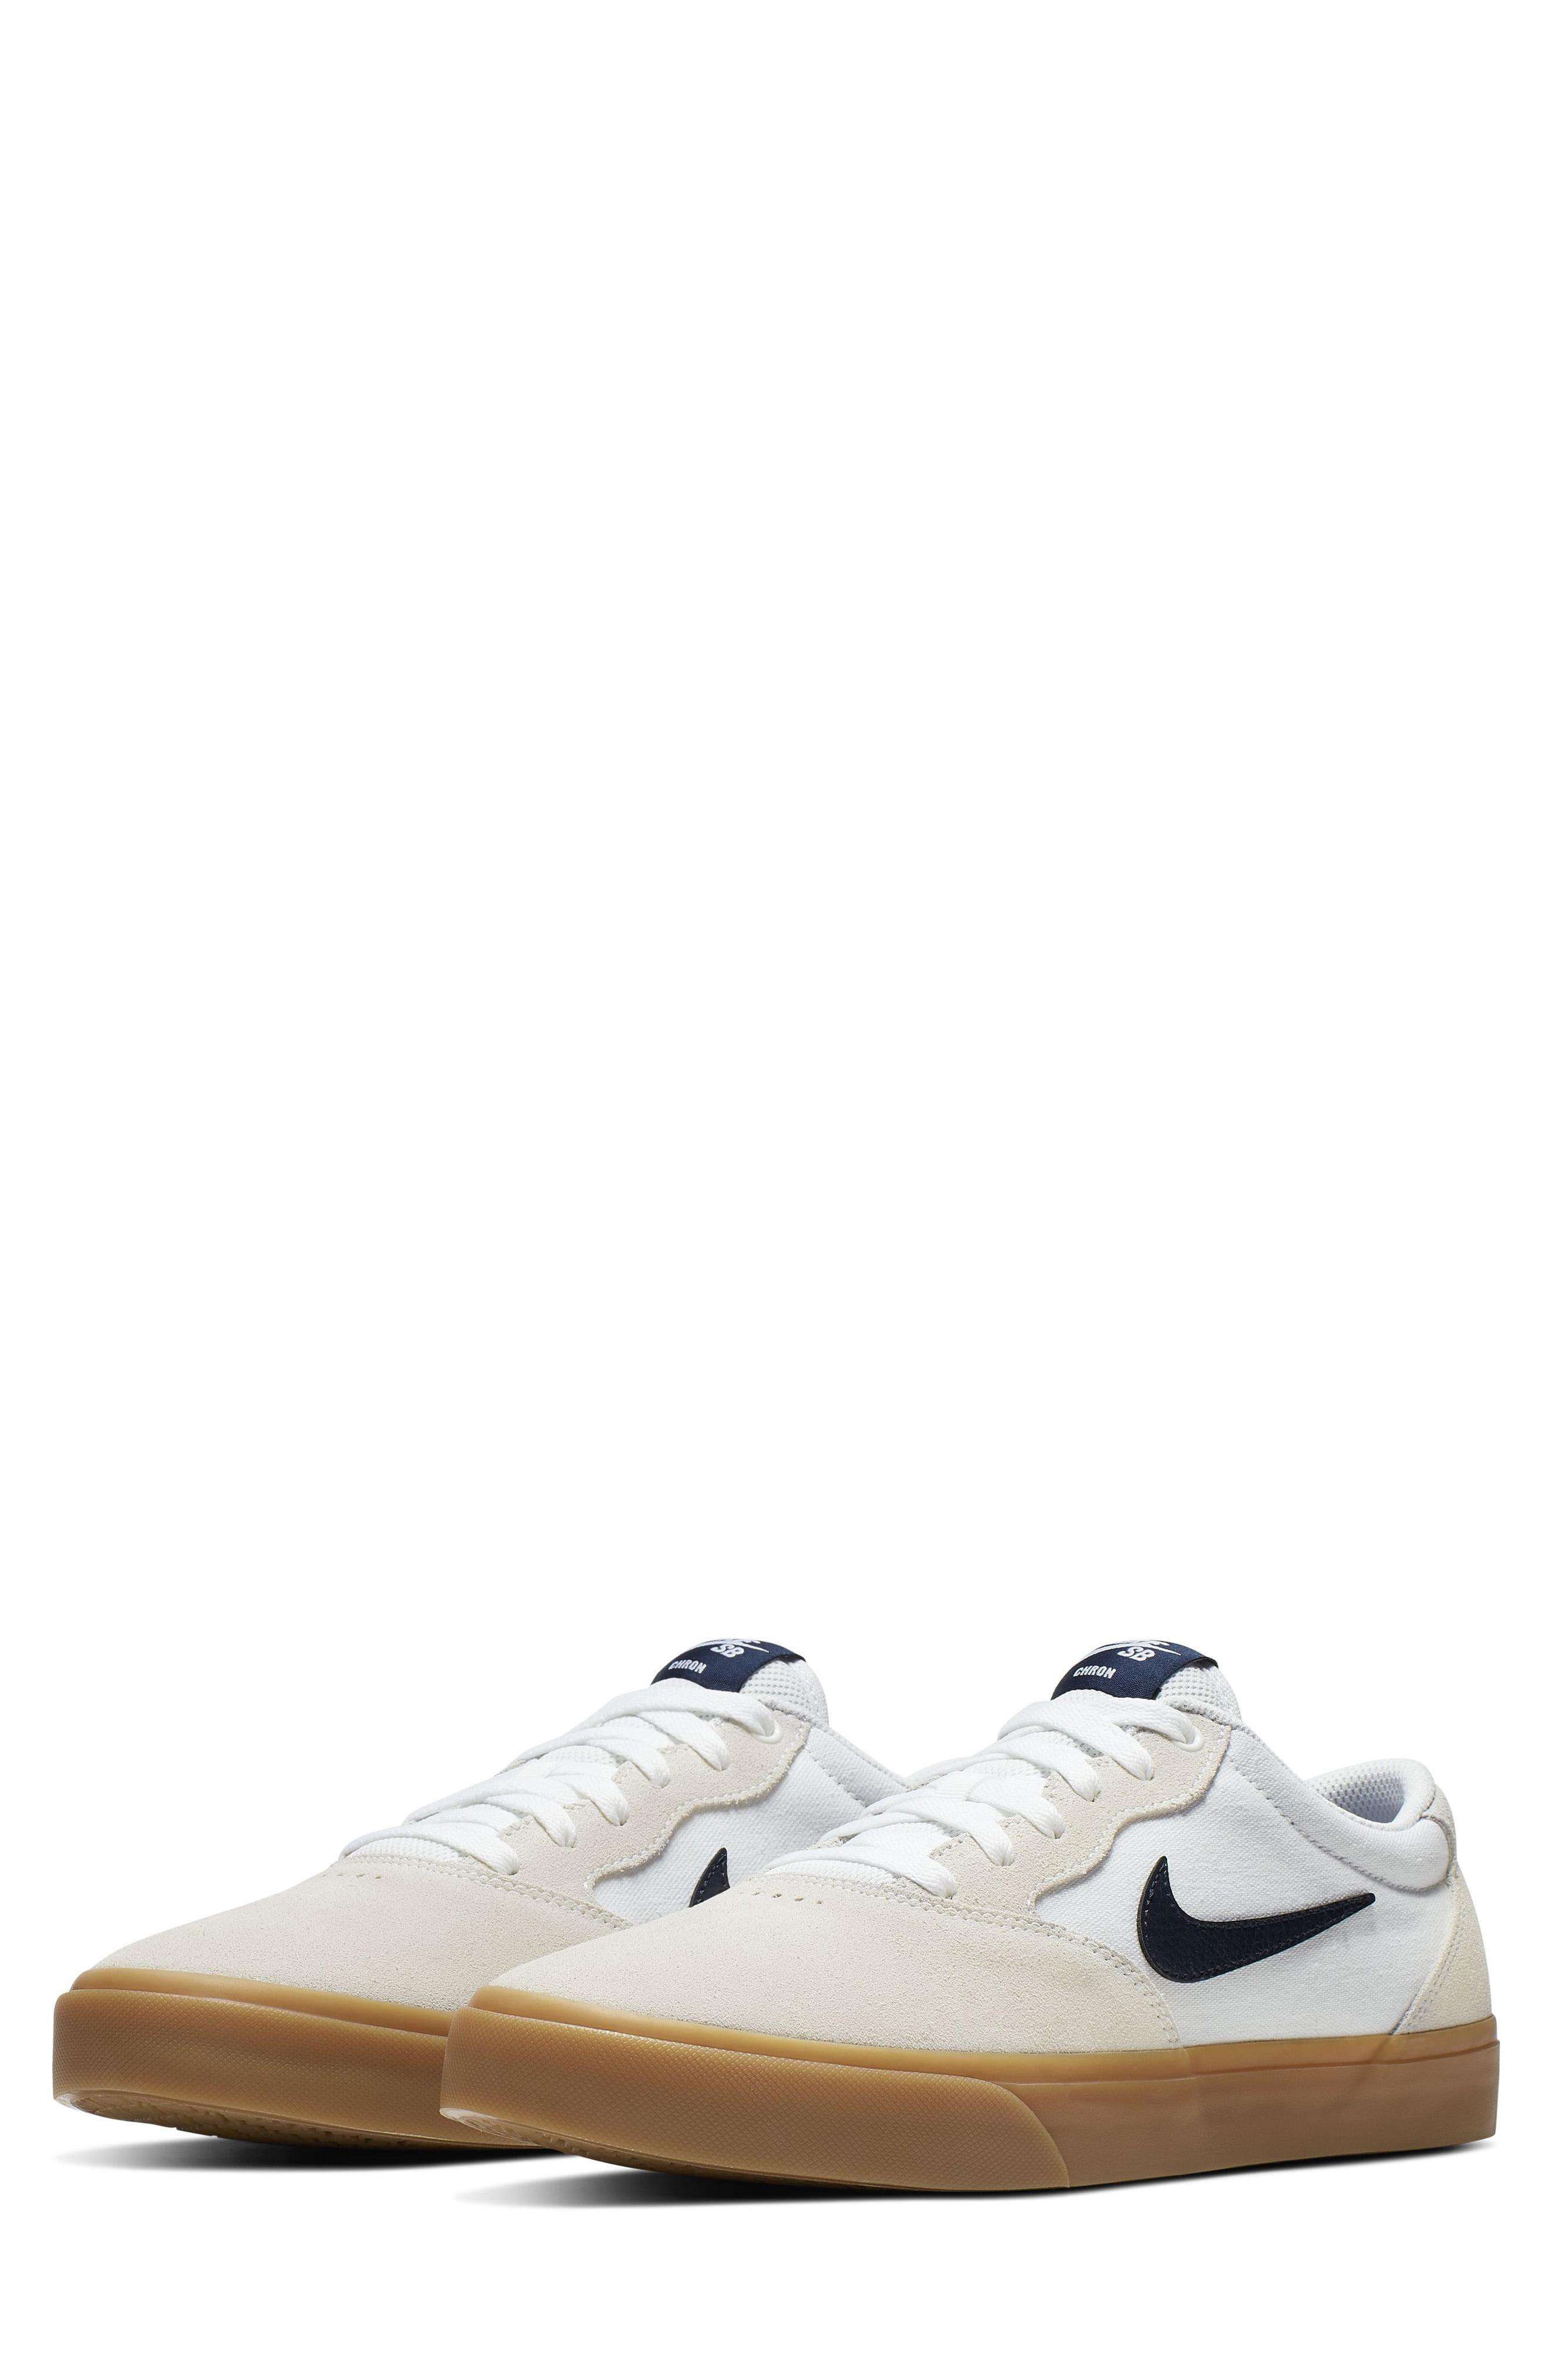 Nike Chron Solarsoft Trainers in White | Lyst